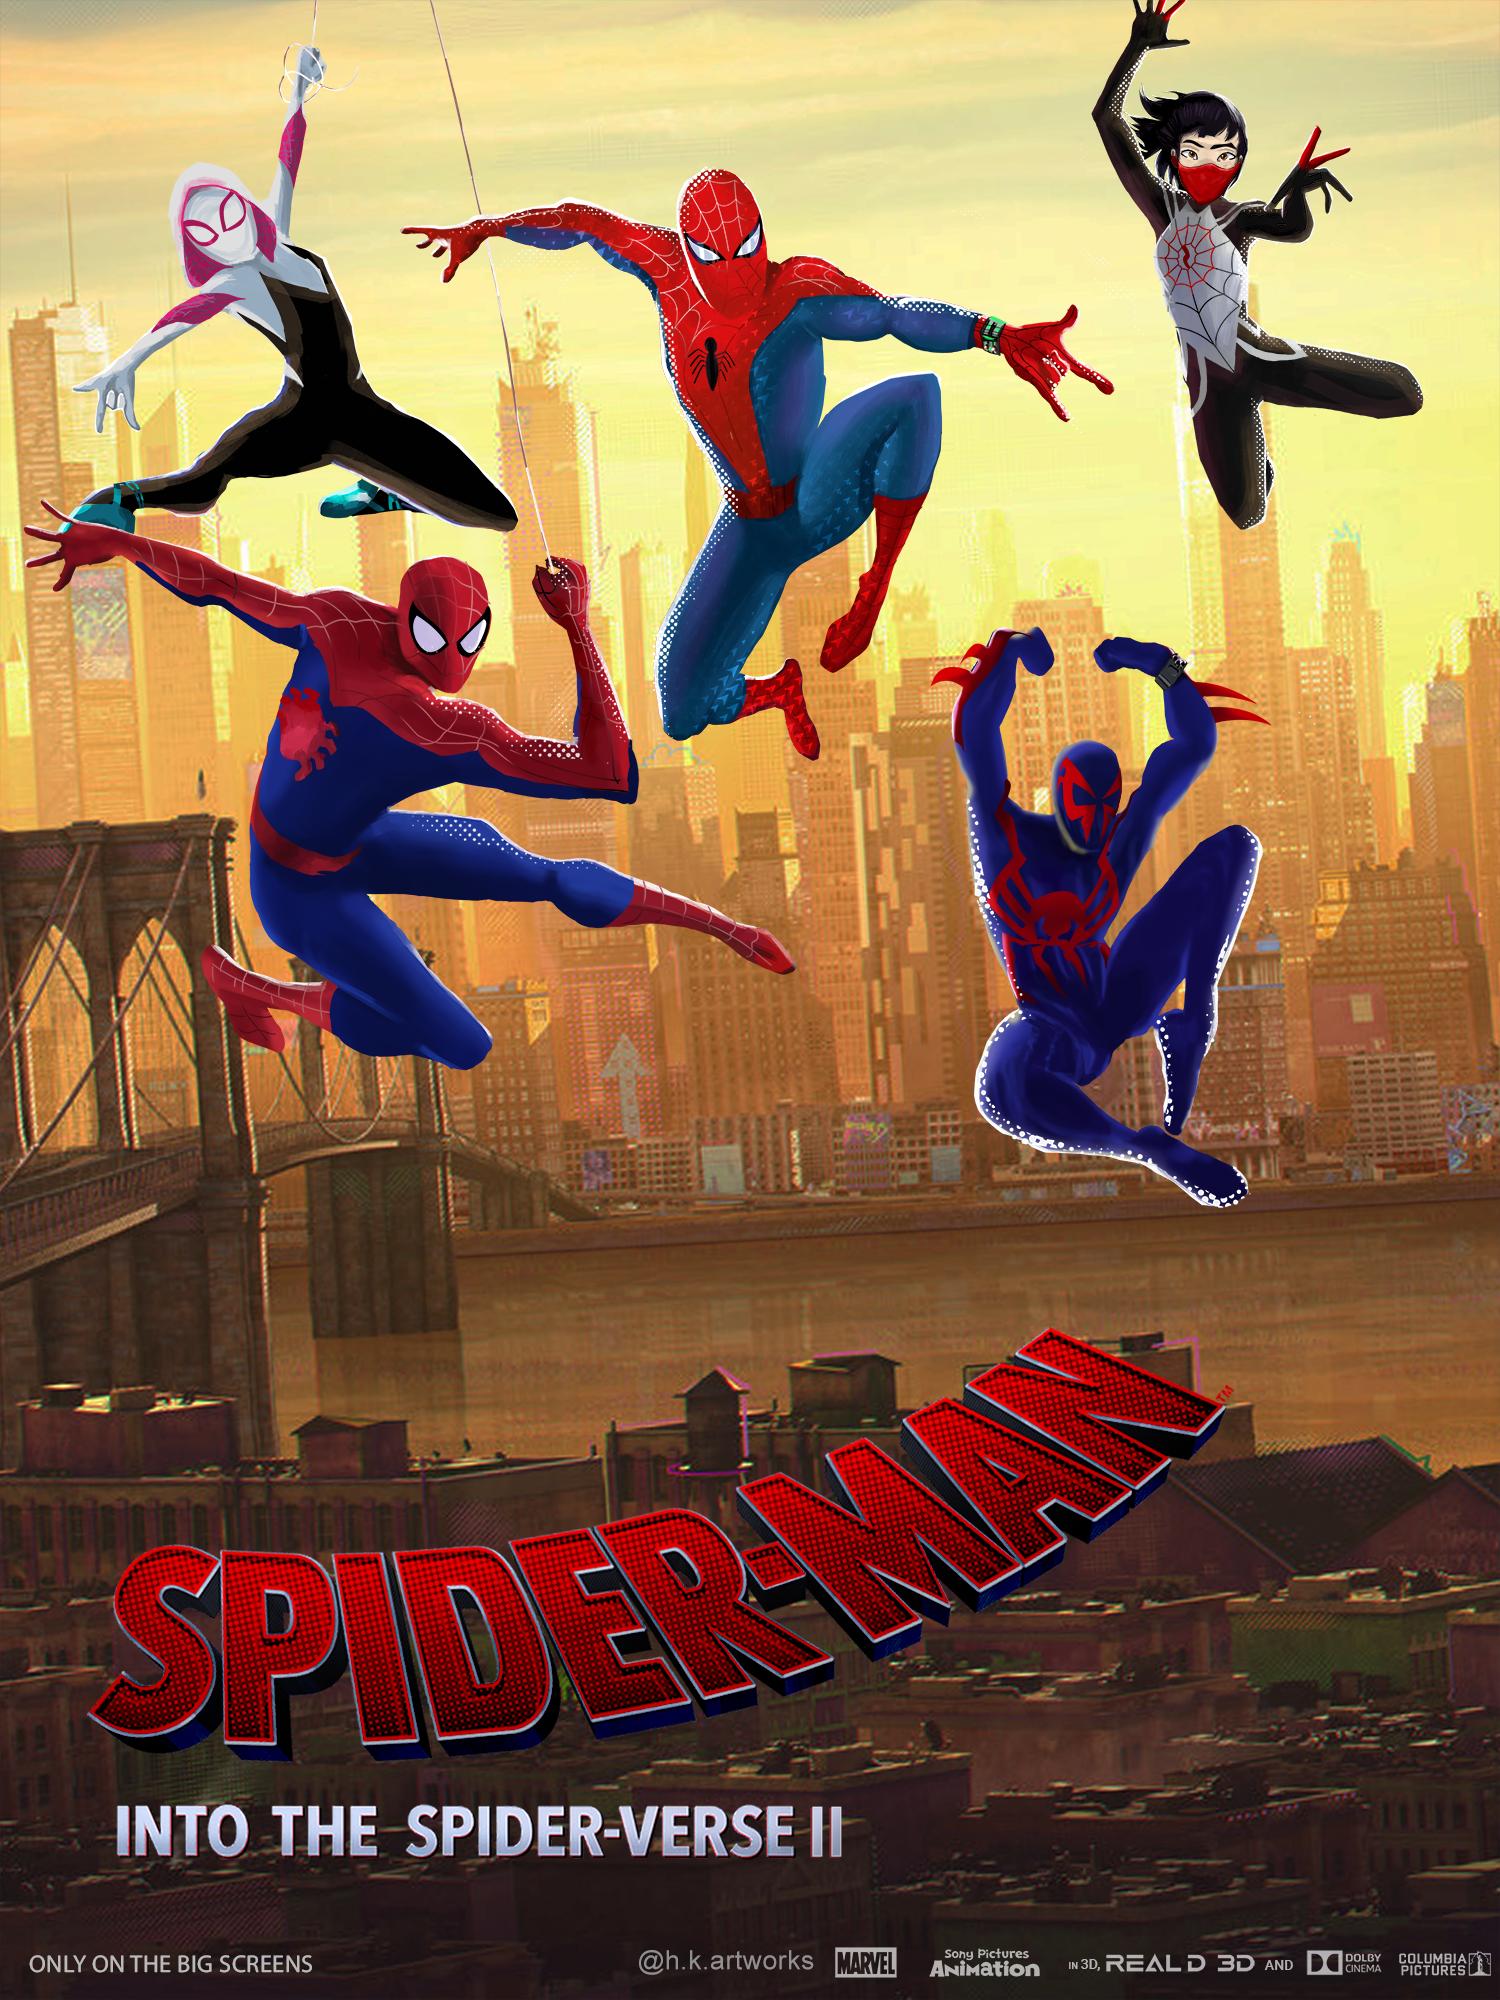 i made Spider-man : Into the spider-verse 2 Poster! hope you like it! it .....